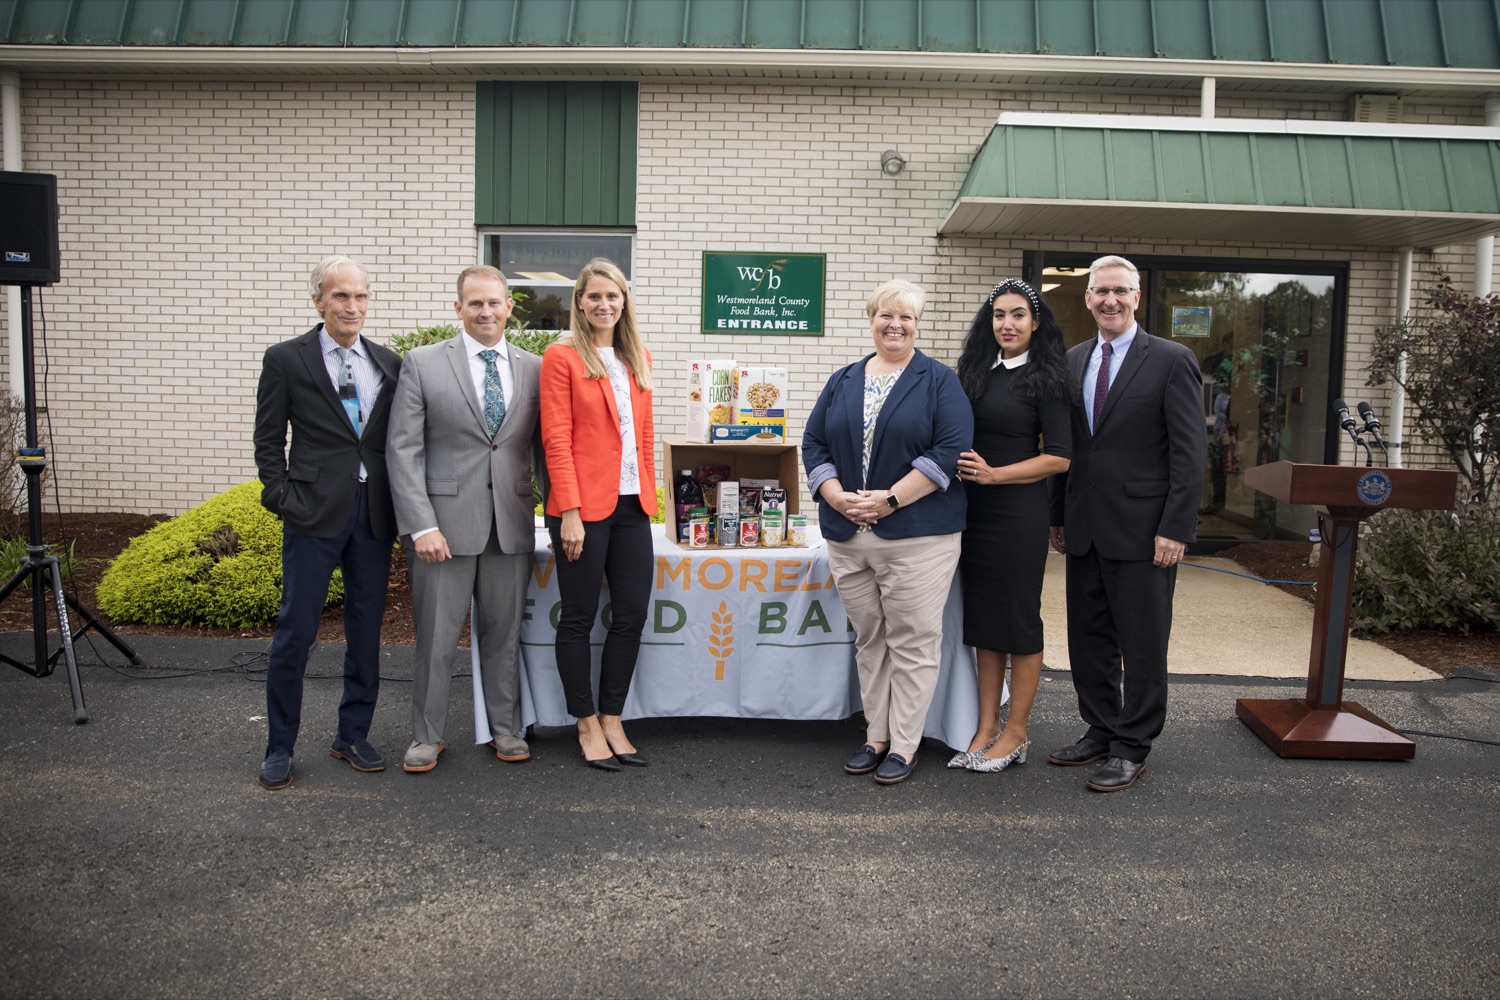 The Wolf Administration announces partnership with DoorDash to deliver meals to seniors in need, in Delmont, PA on September 23, 2021.<br><a href="https://filesource.amperwave.net/commonwealthofpa/photo/19091_ag_doordash_cz_09.jpg" target="_blank">⇣ Download Photo</a>